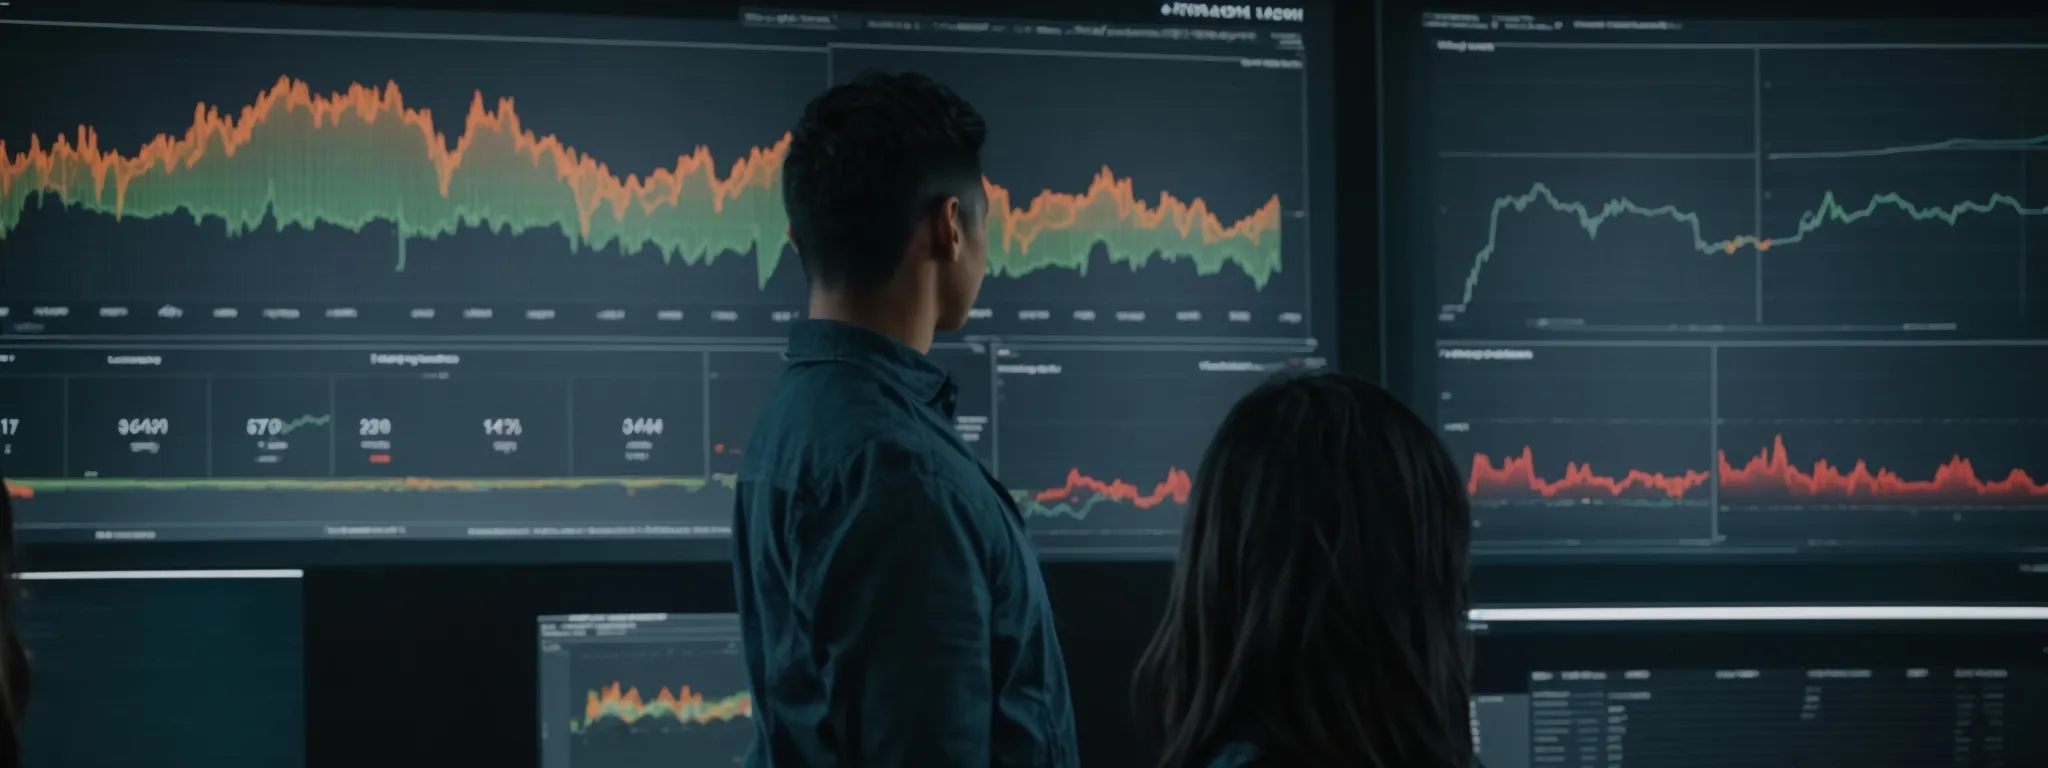 a person standing in front of a large digital marketing analytics dashboard, intensely focused on graphs depicting keyword trends and performance metrics.